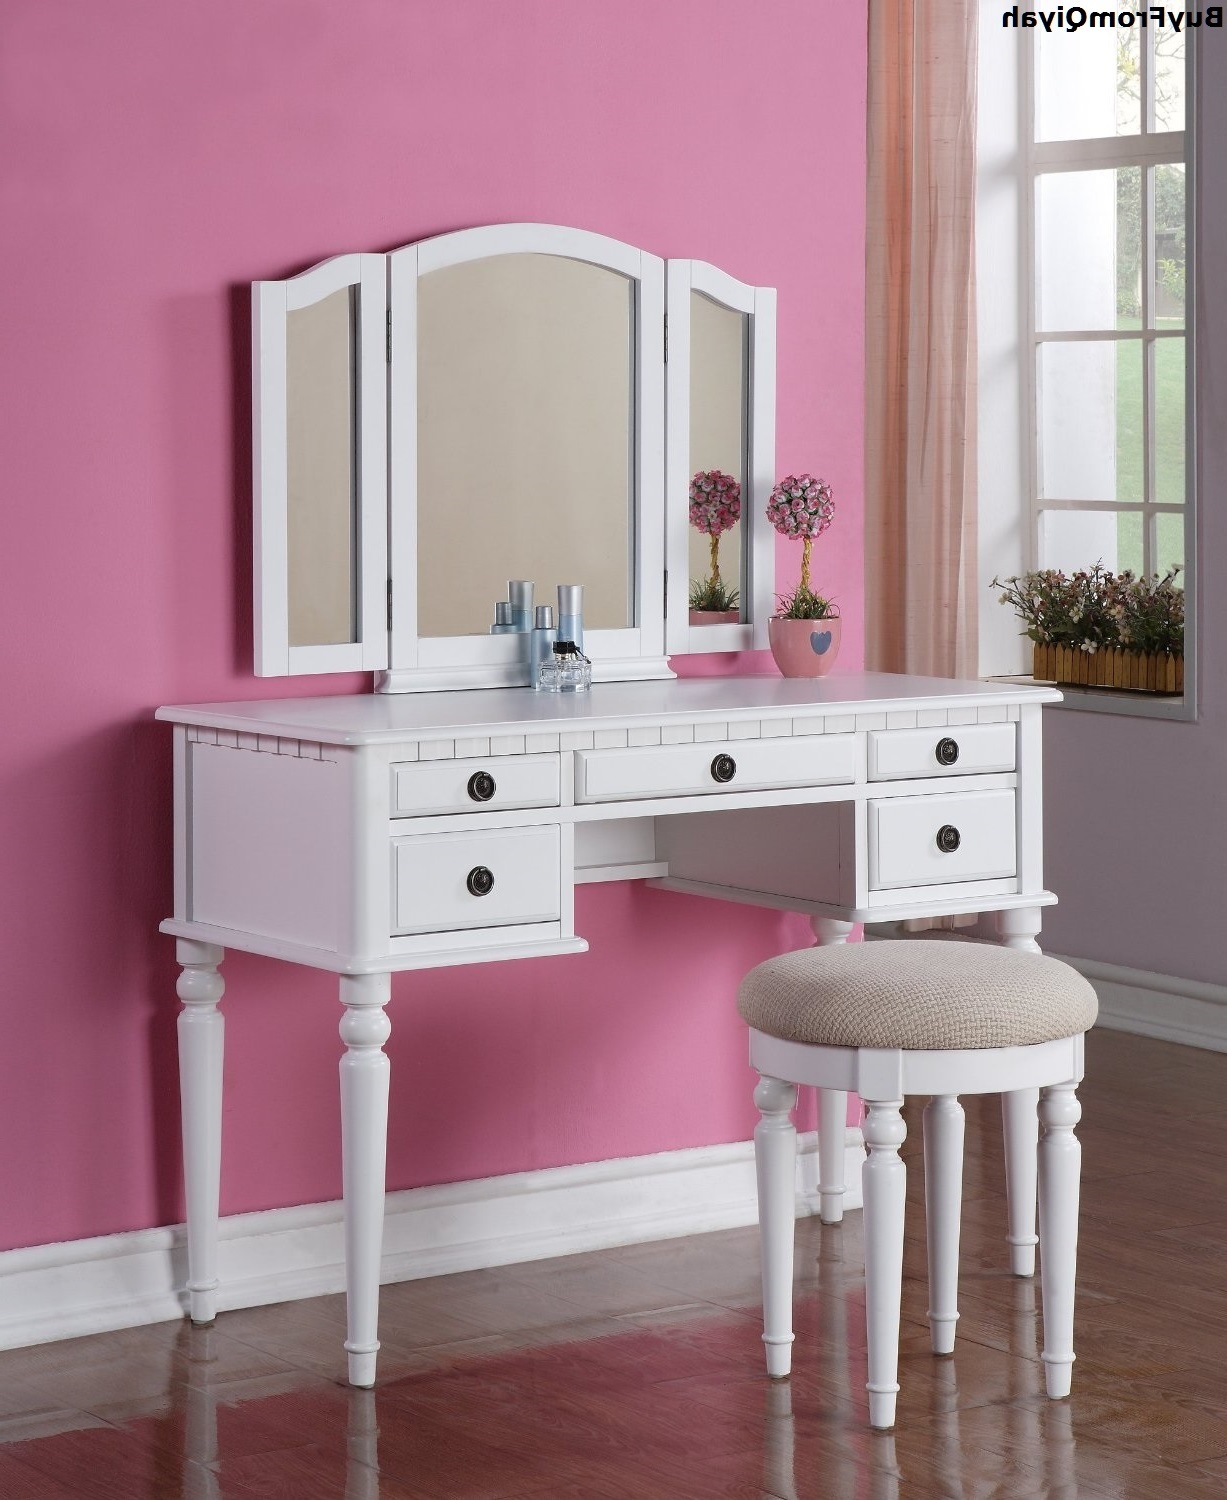 Bobkona St. Croix Collection Vanity Set with Stool, Drawer-Home-Organize-Beauty - $389.49